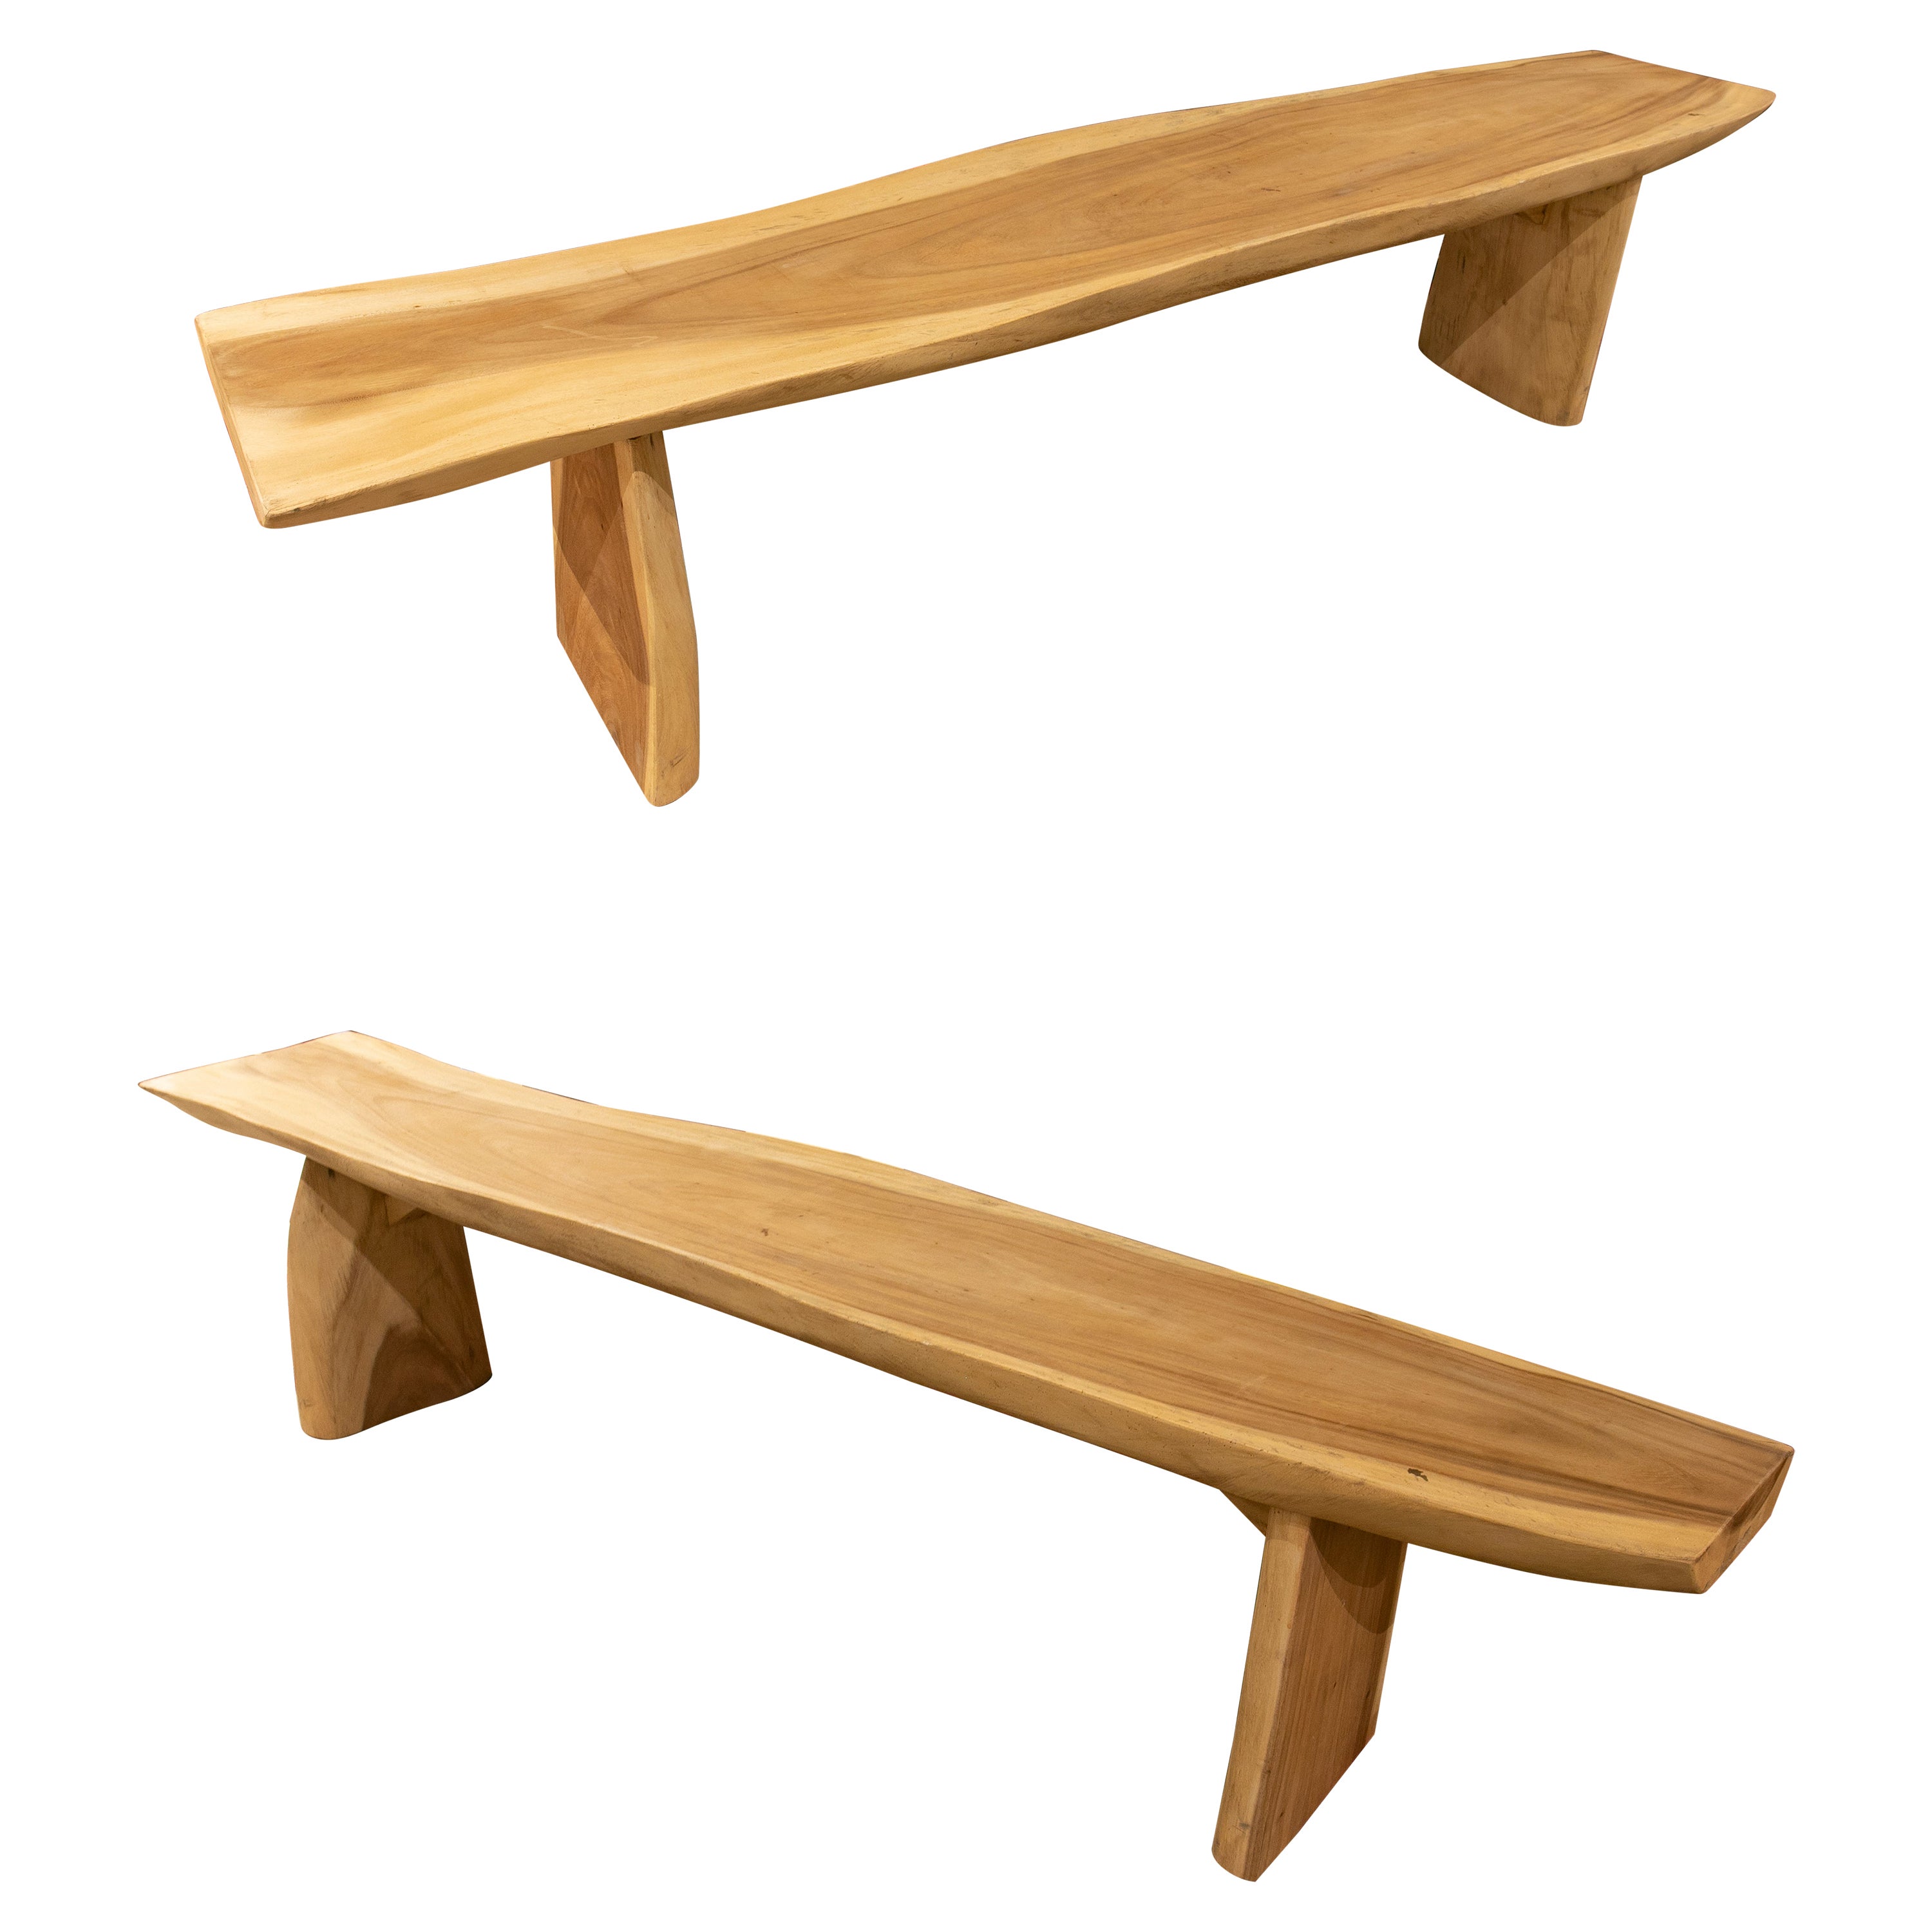 Pair of Wooden Benches in Their Natural Colour